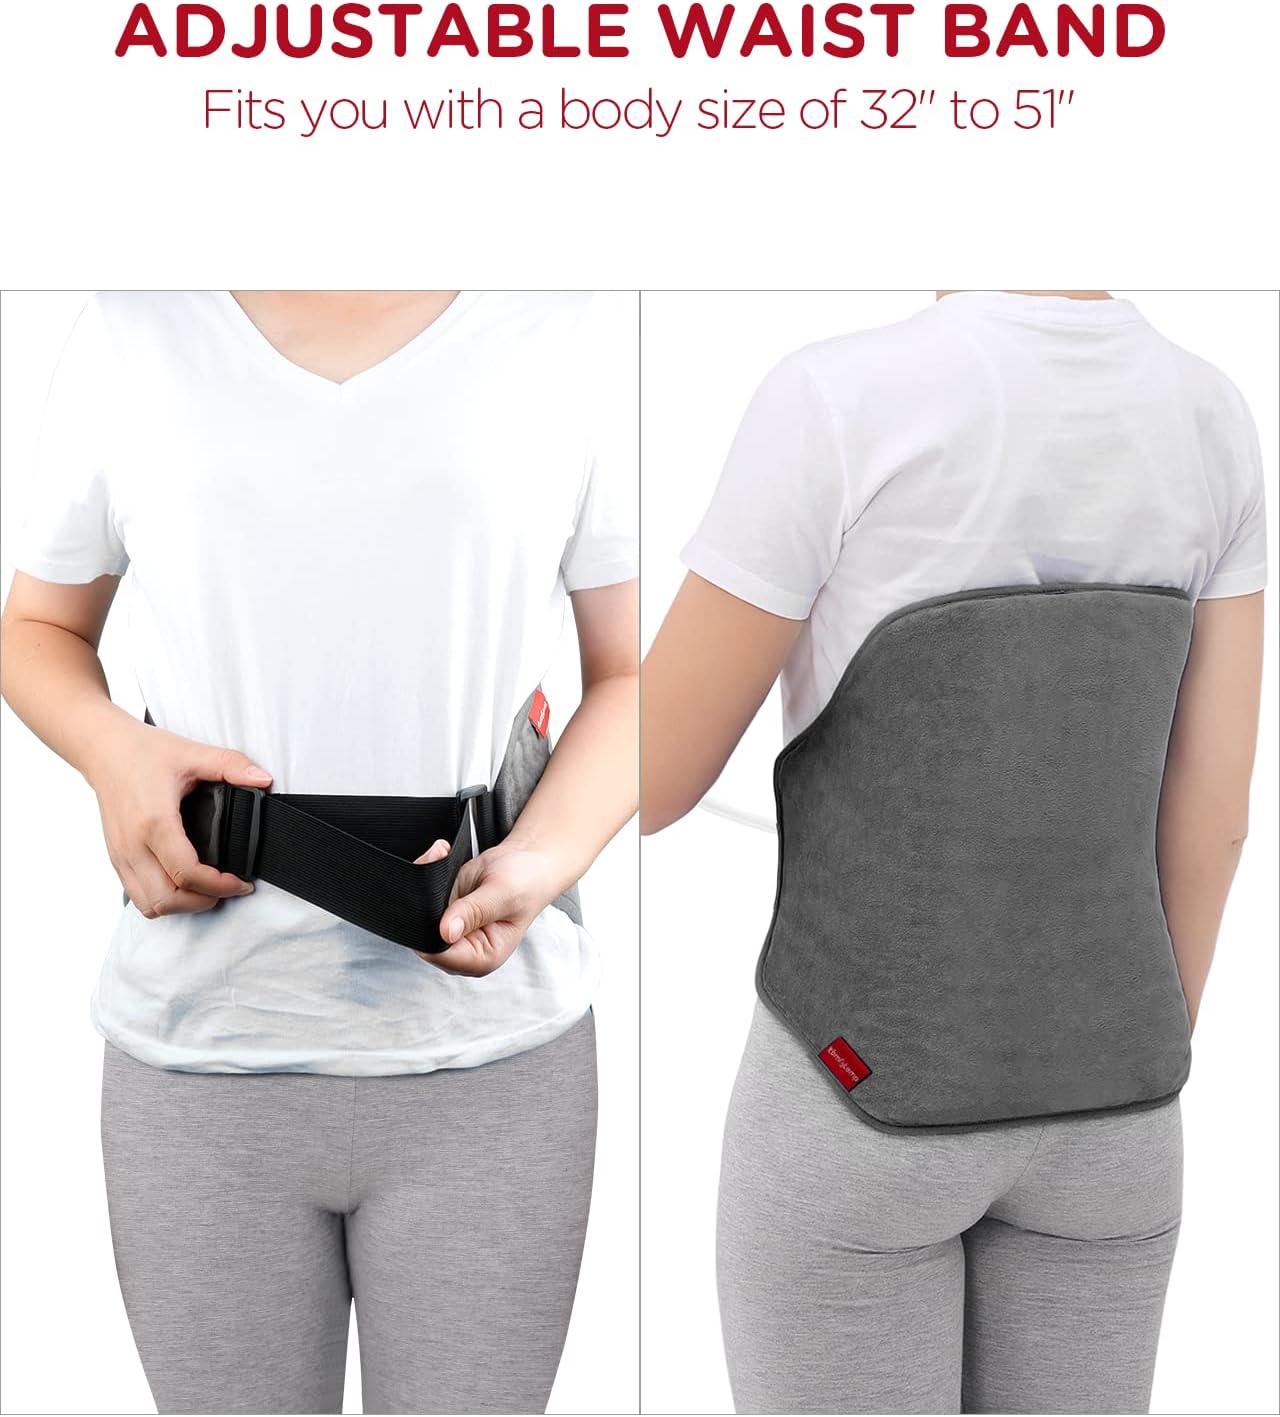 ComfyWarmth™ Upgraded Heating Pad for Back Pain Relief